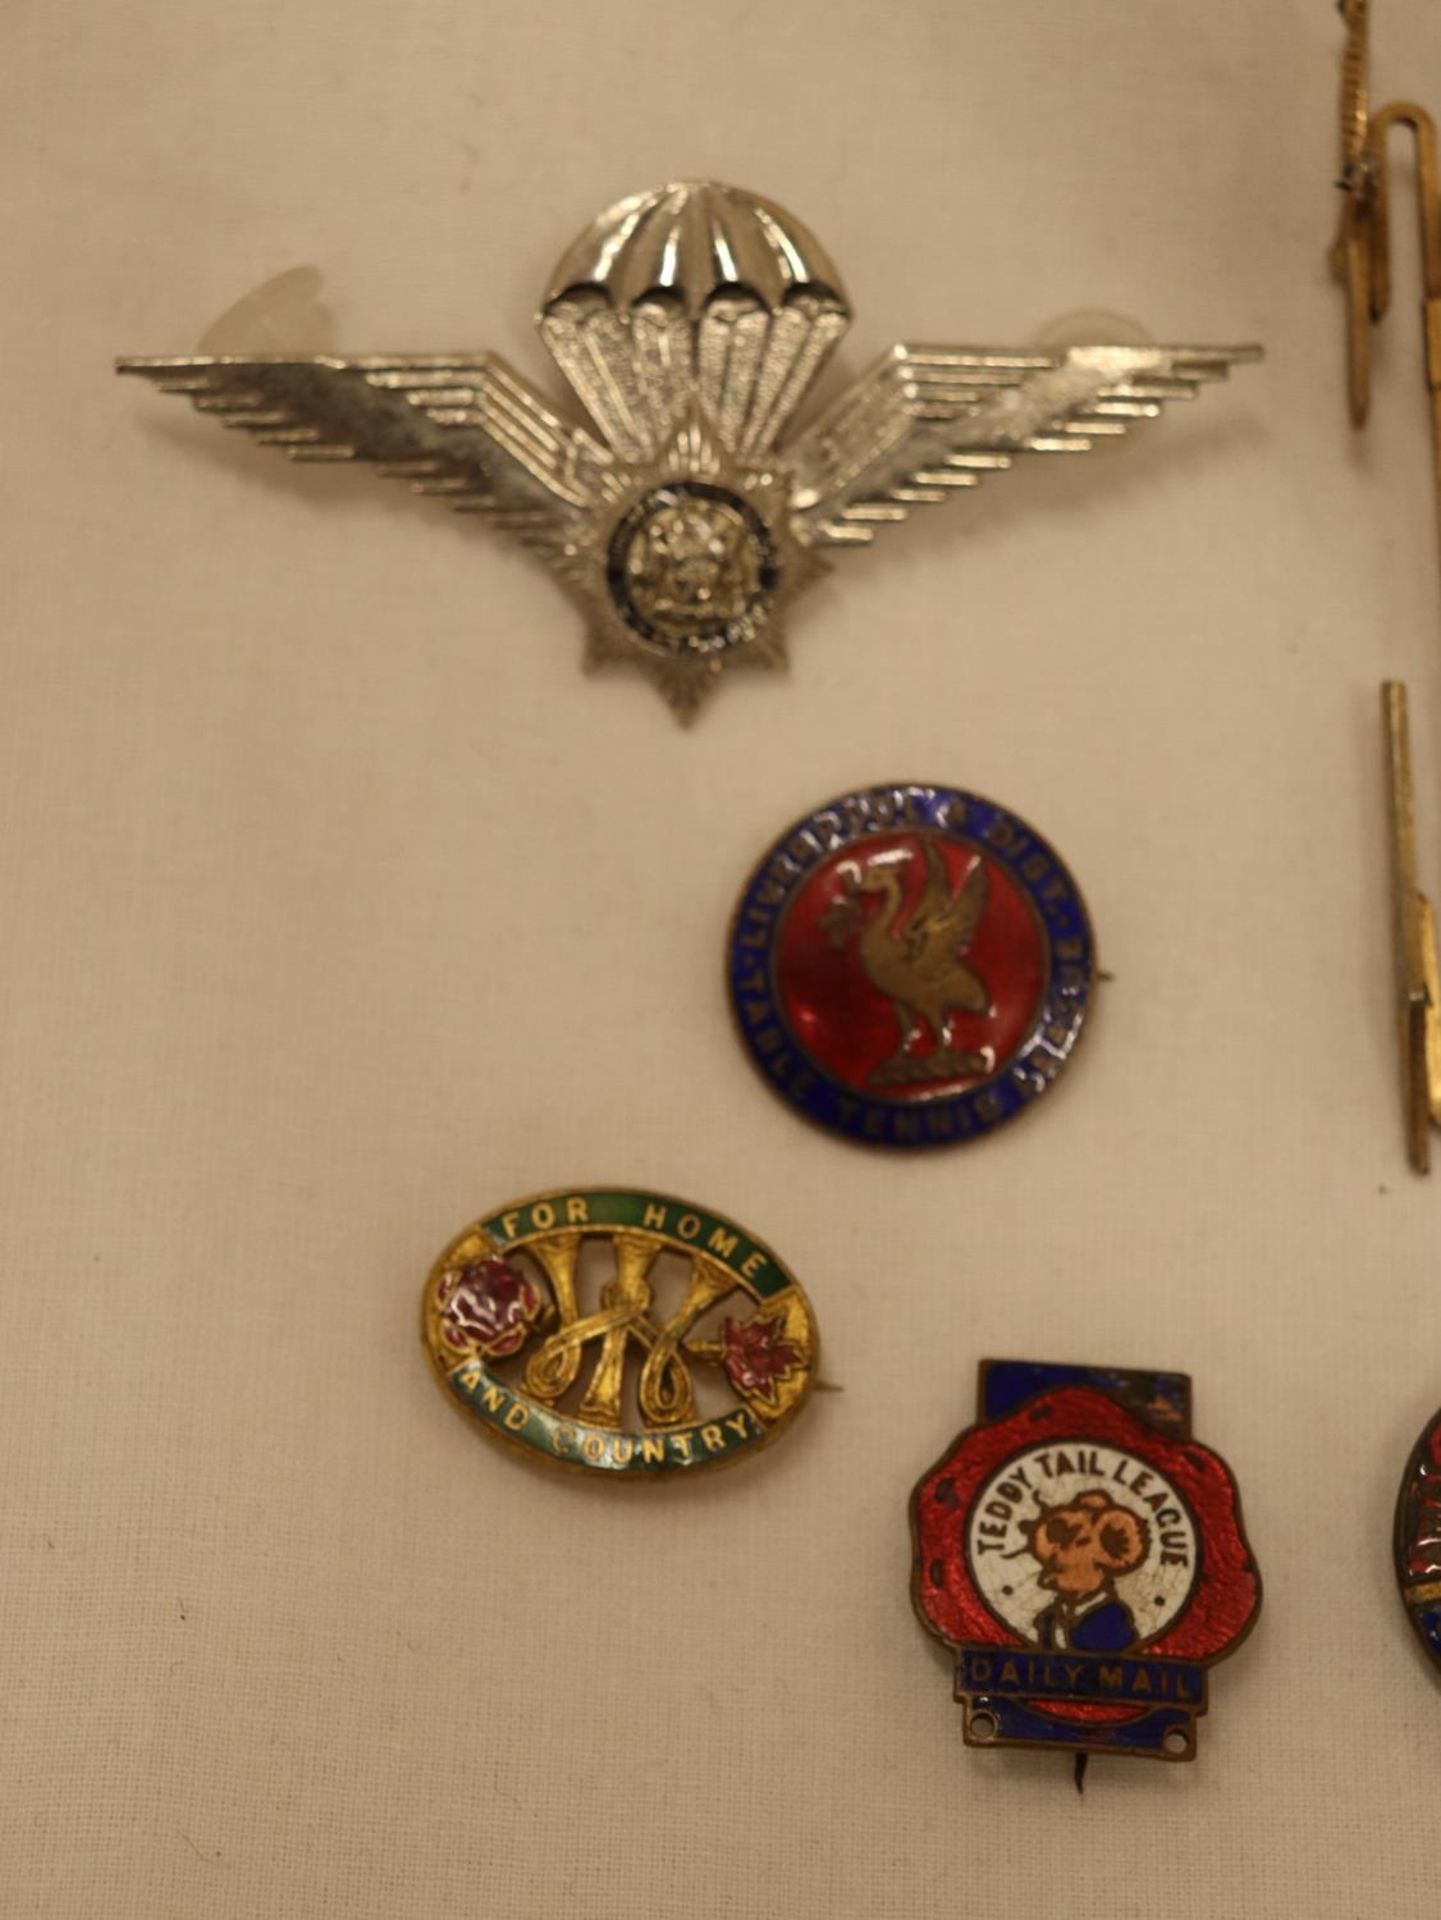 ACOLLECTION OF VINTAGE BADGES TO INCLUDE MILITARIA - 9 IN TOTAL - Image 4 of 5